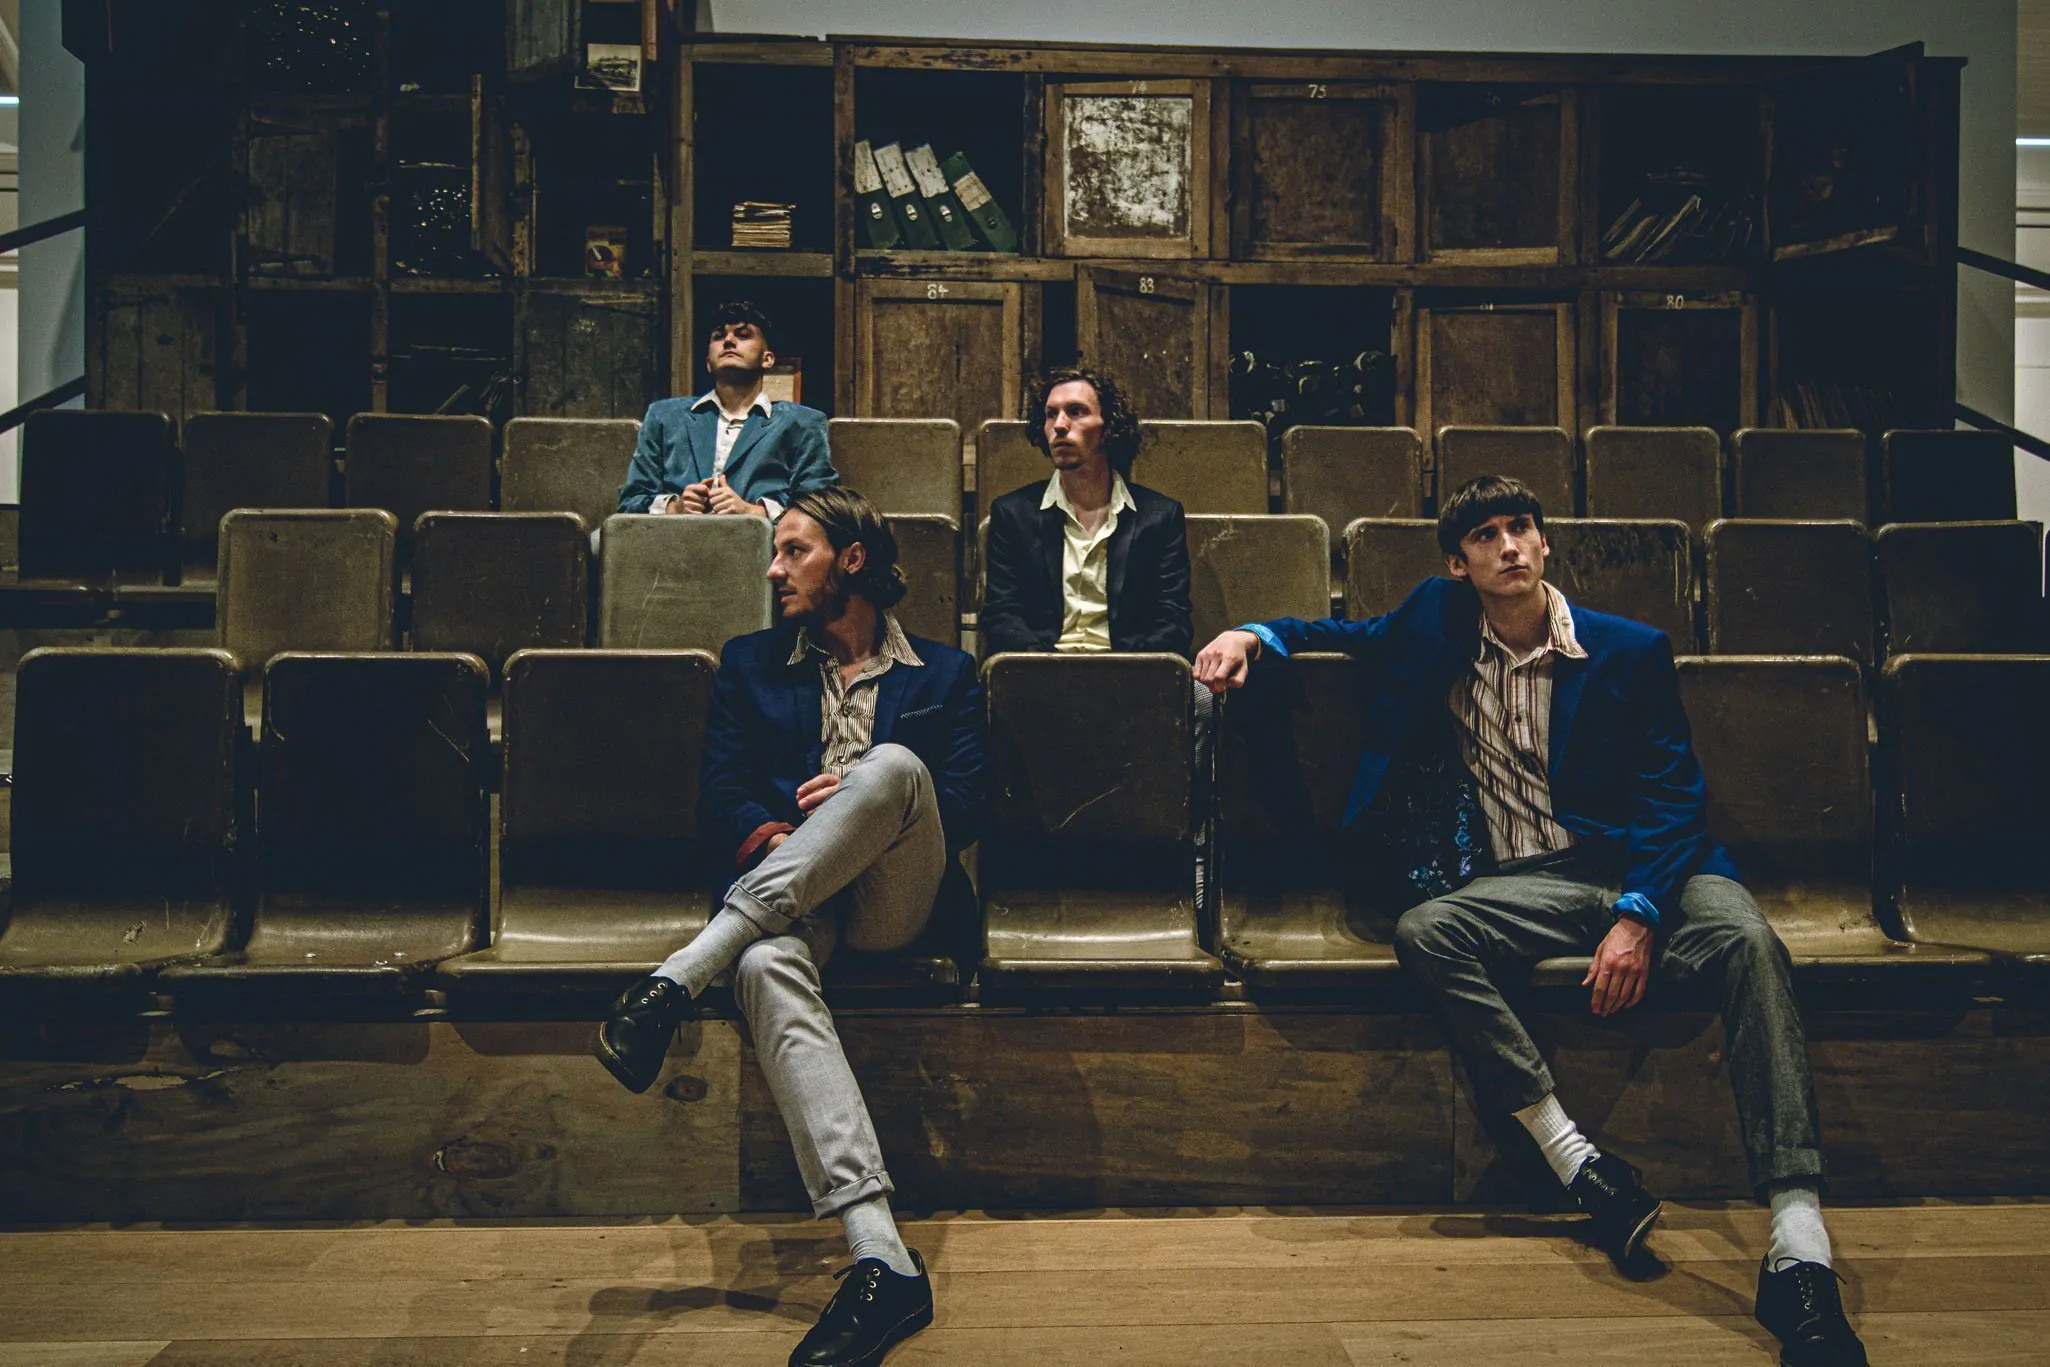 VIDEO PREMIERE: Dantevilles – ‘Confession’ from new EP, ‘Welcome to the Theatre’ – Watch Now